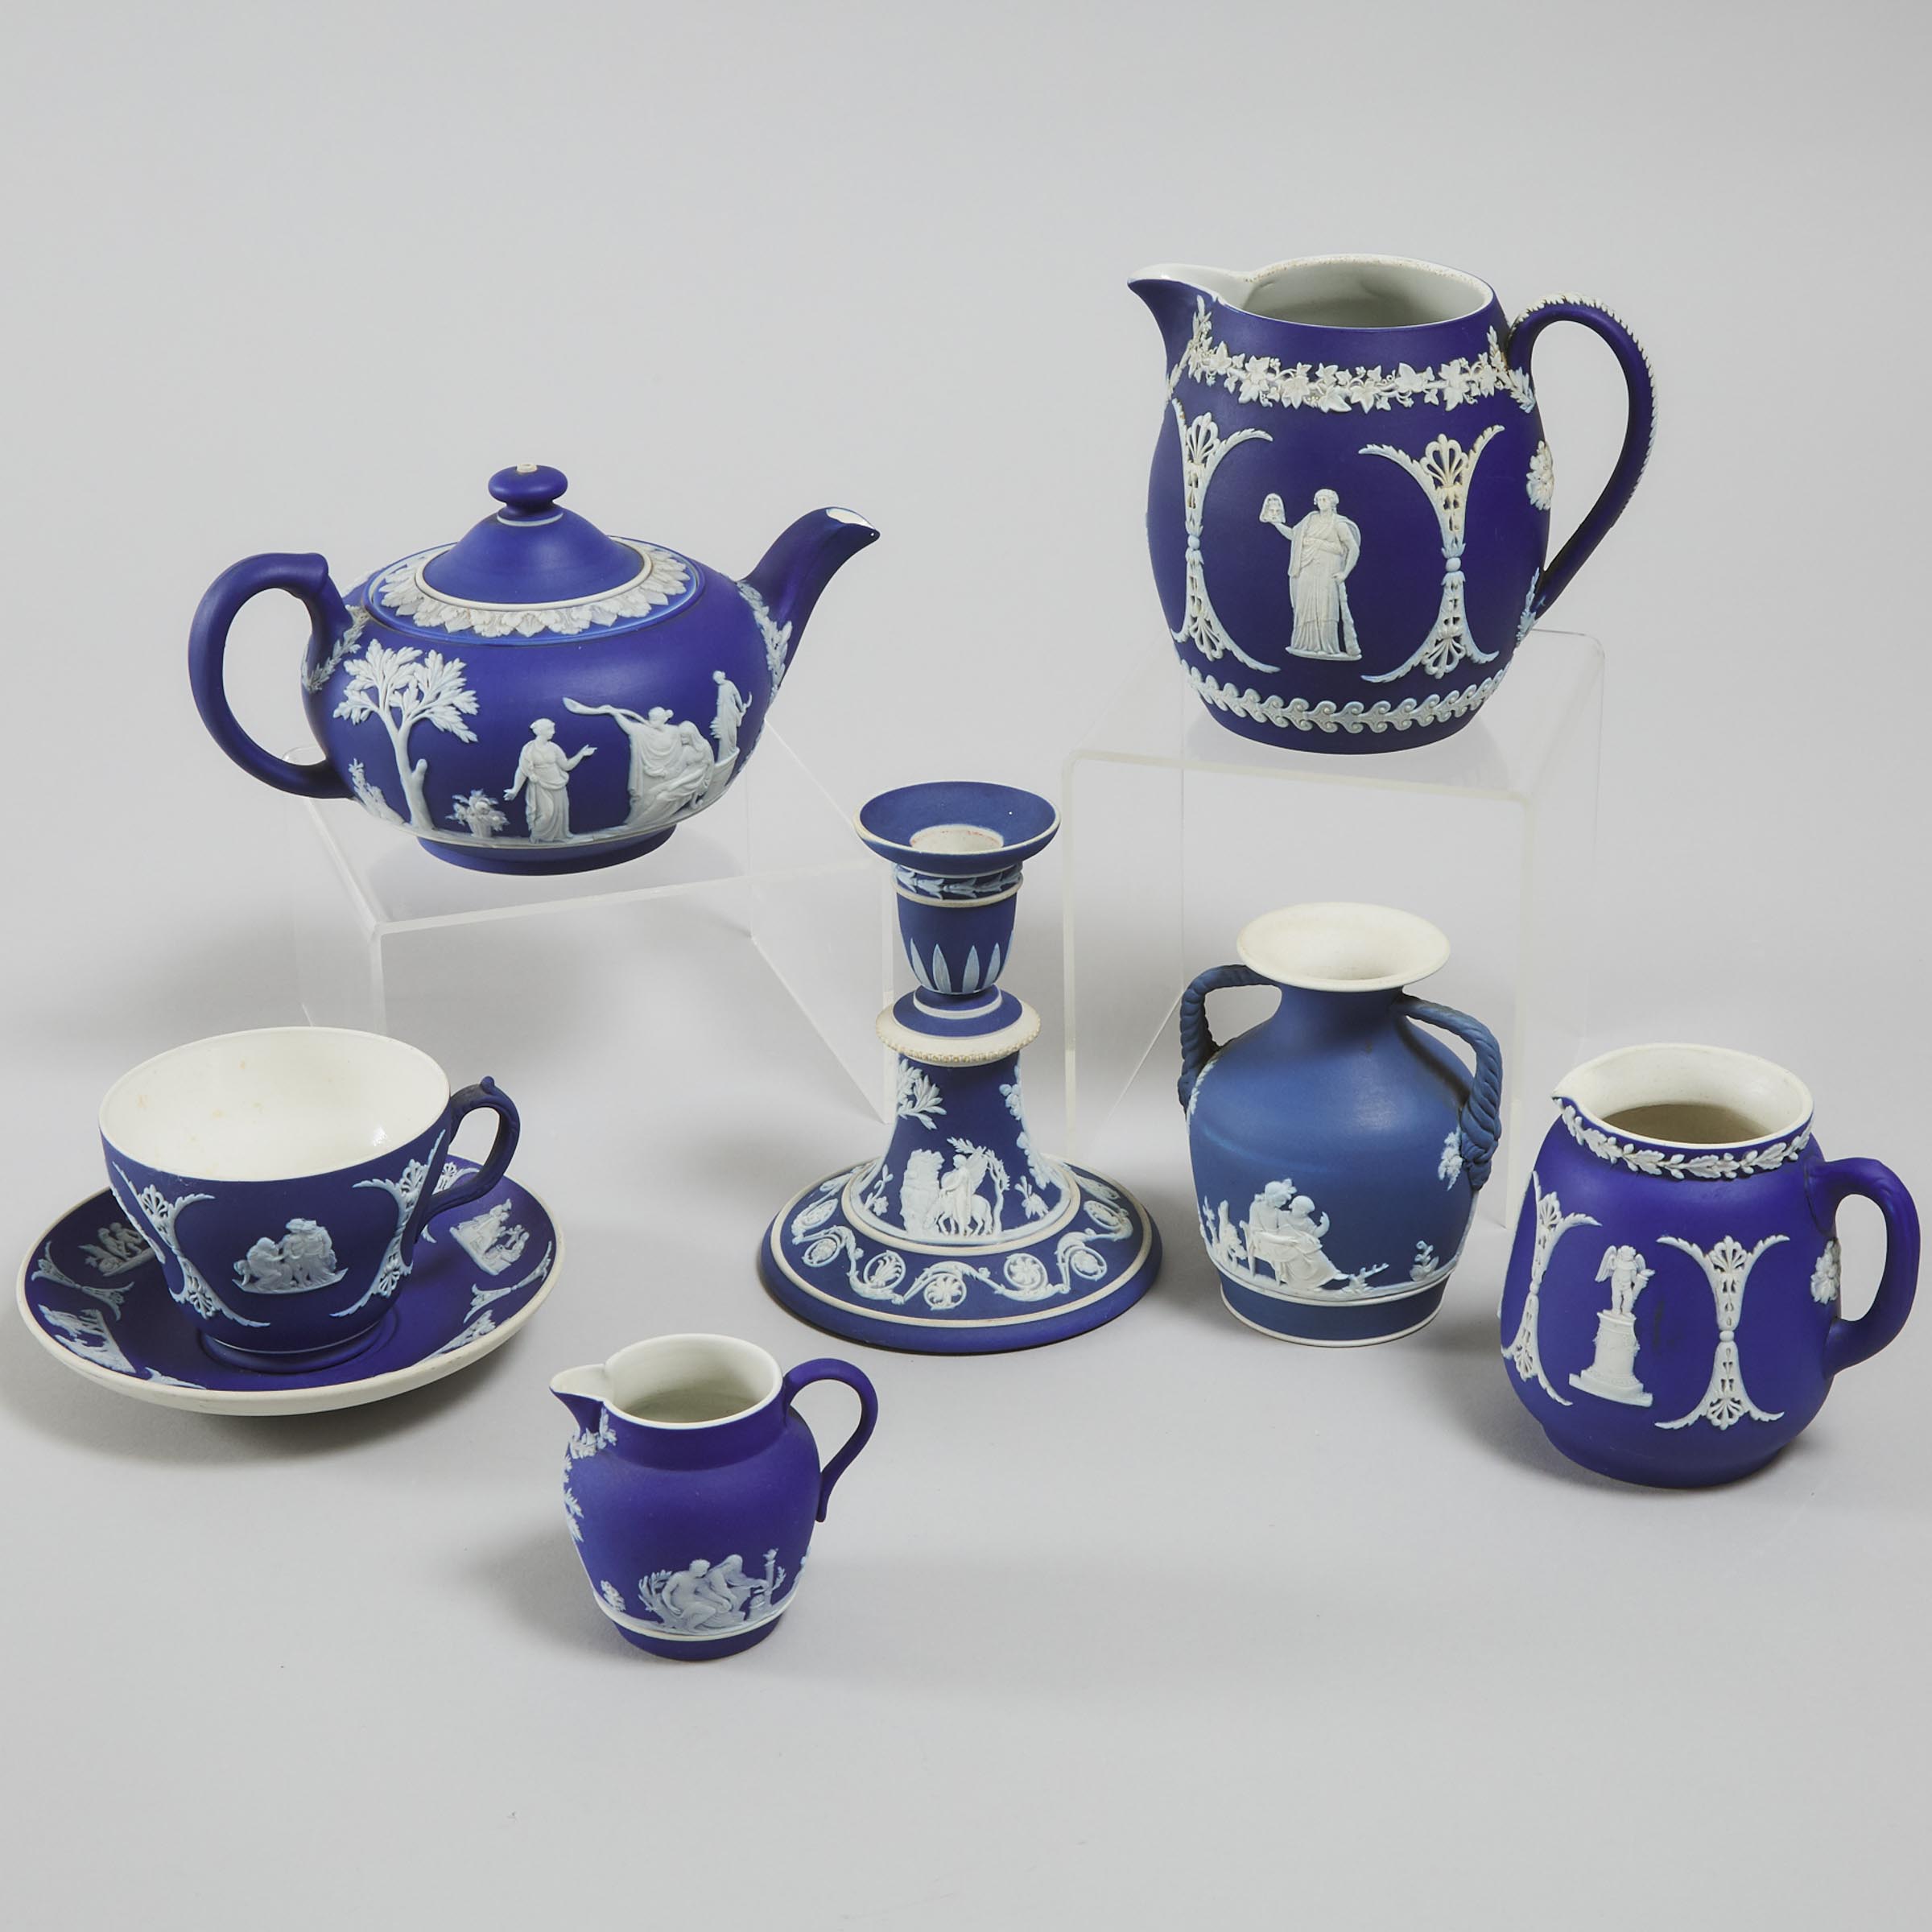 Group of Wedgwood Blue Jasper-Dip Pottery, late 19th/early 20th century